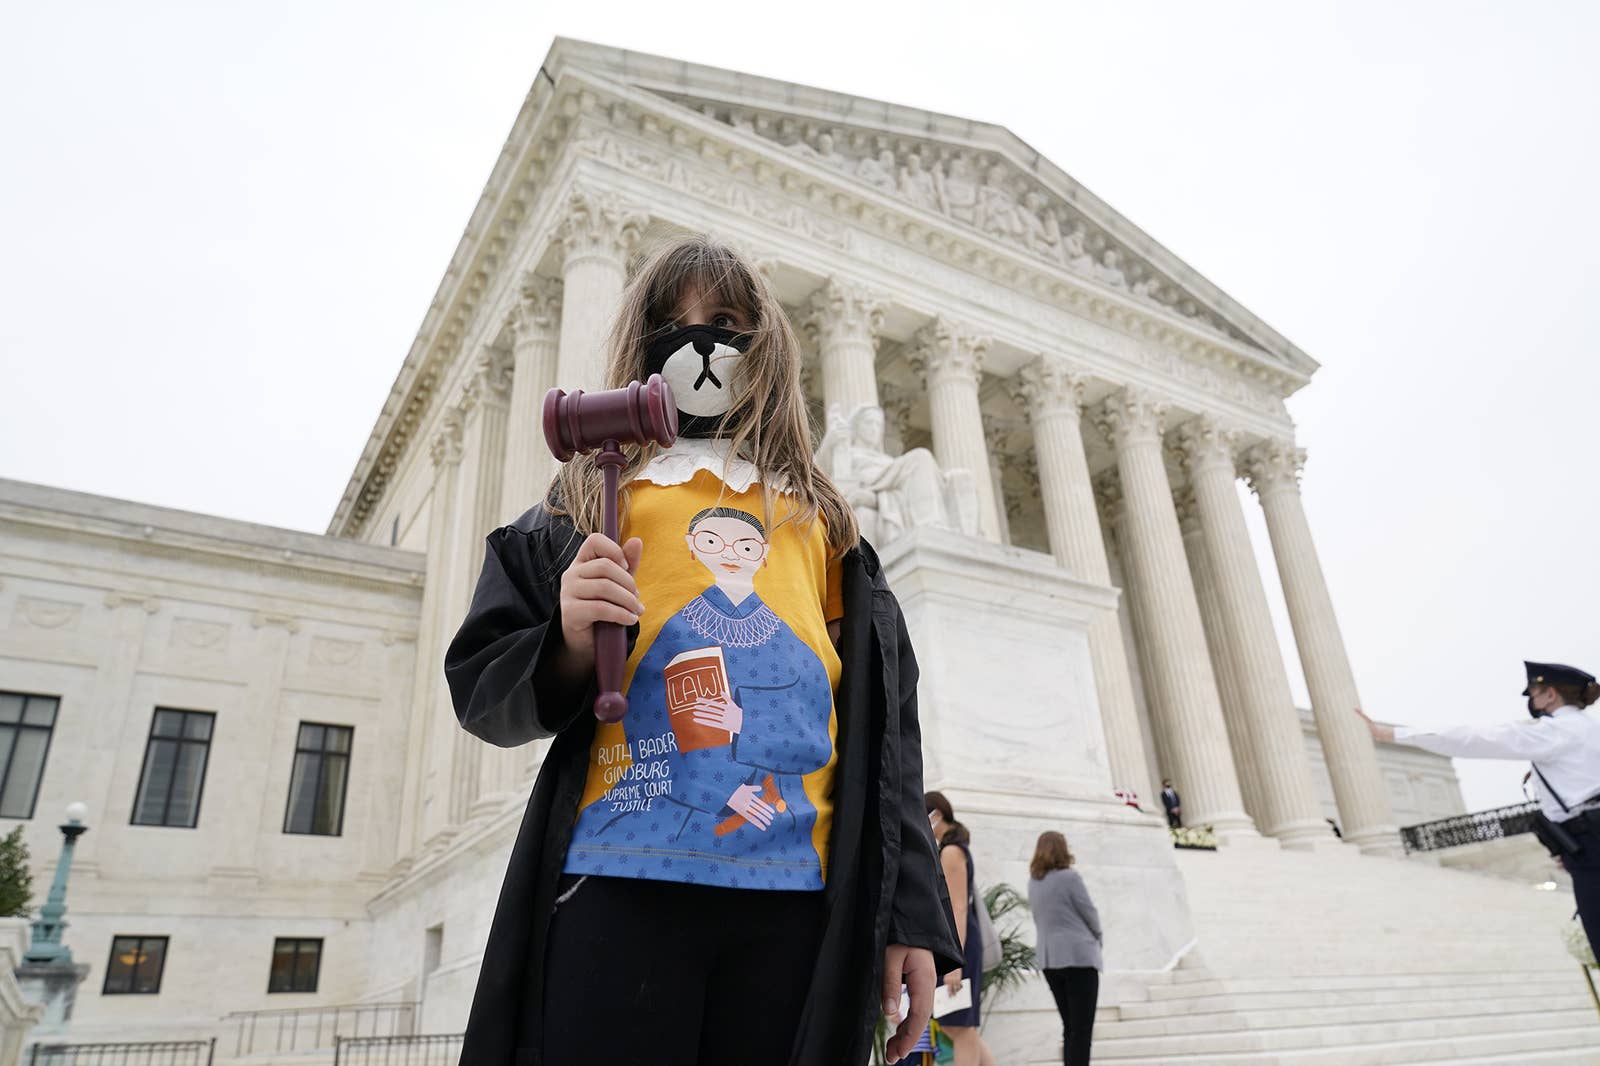 A girl wearing an RGB shirt carries a gavel in front of the Supreme Court